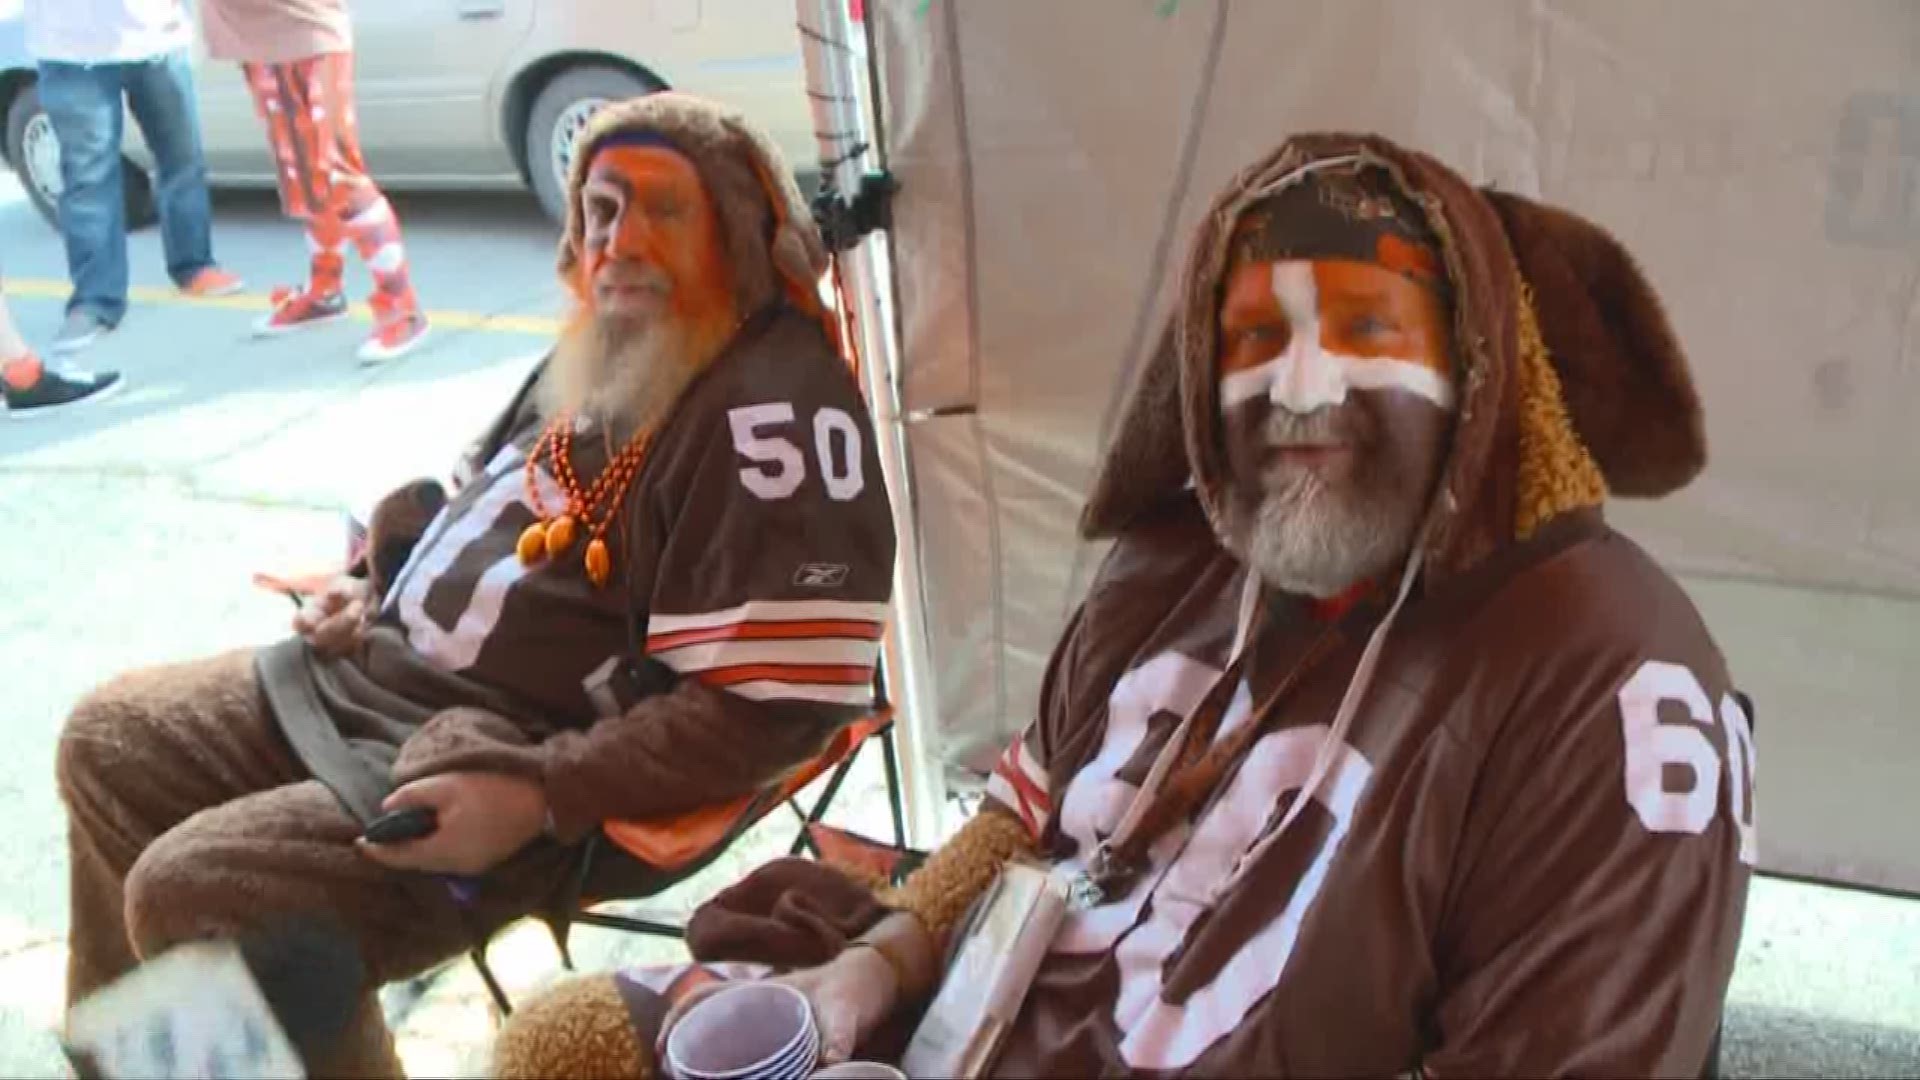 Sept. 6, 2019: The Cleveland Browns are ready for the season to begin at FirstEnergy Stadium. With the stadium expected to be jam-packed with sold-out crowds, here are some key tips to attending a game in Cleveland.